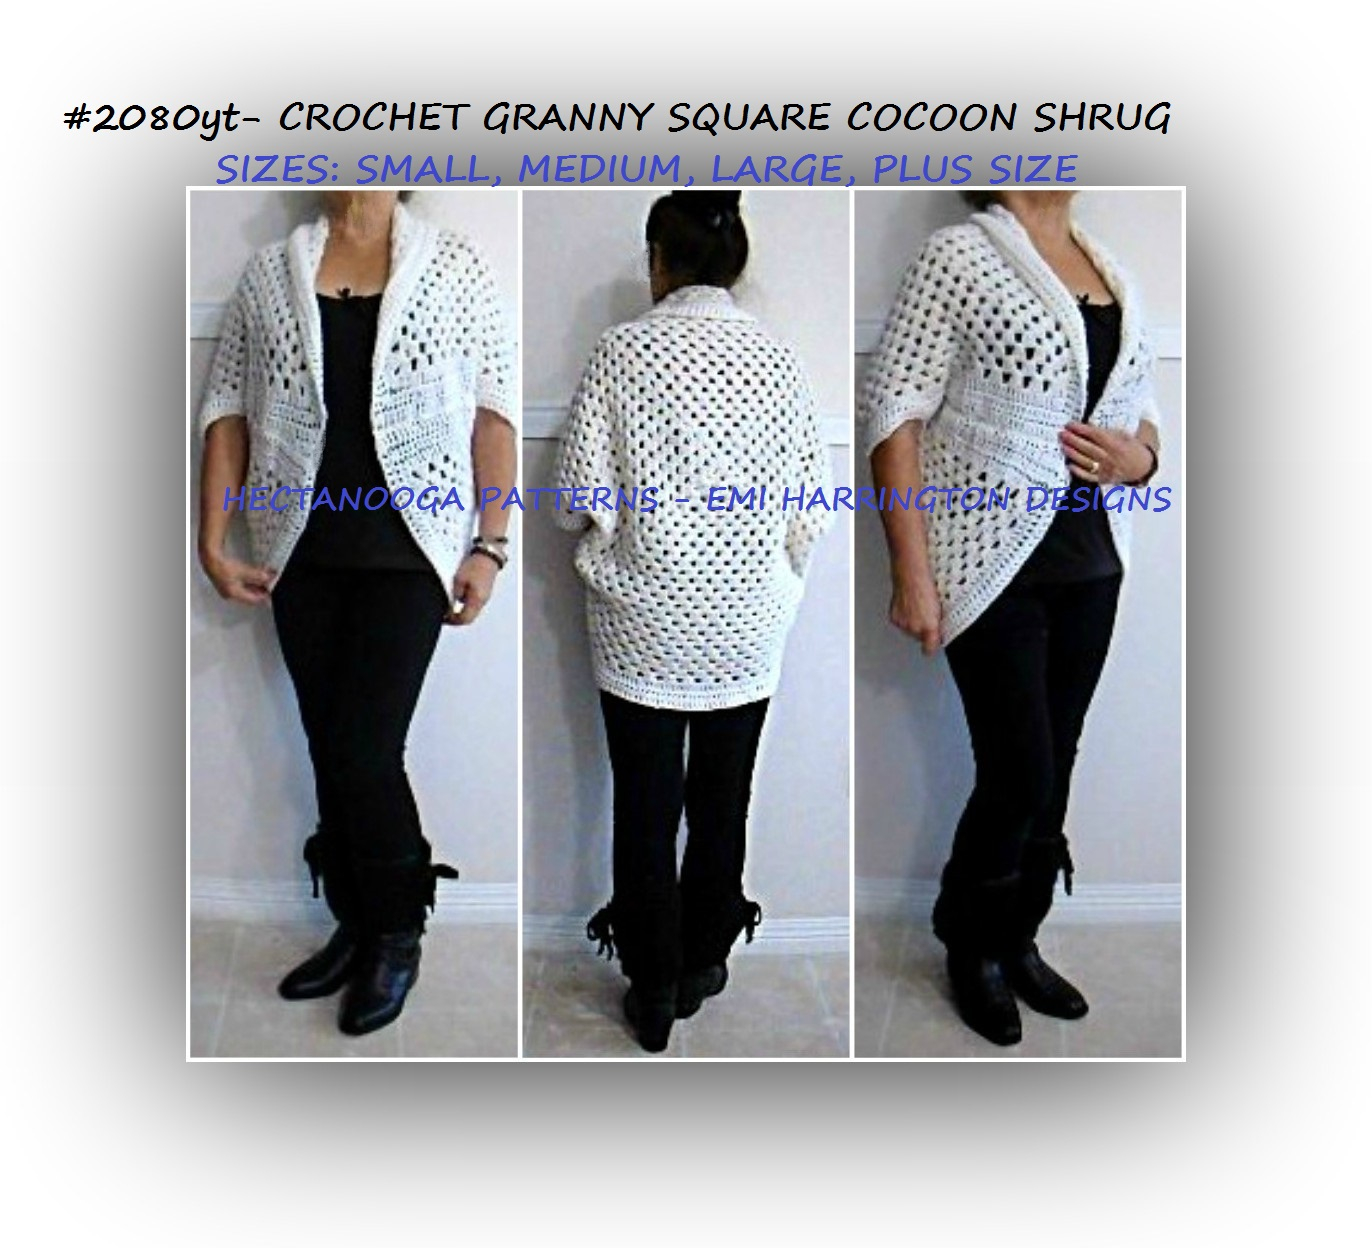 Plus Size Crochet Patterns Hectanooga Patterns Free Crochet Pattern Granny Square Outdoor